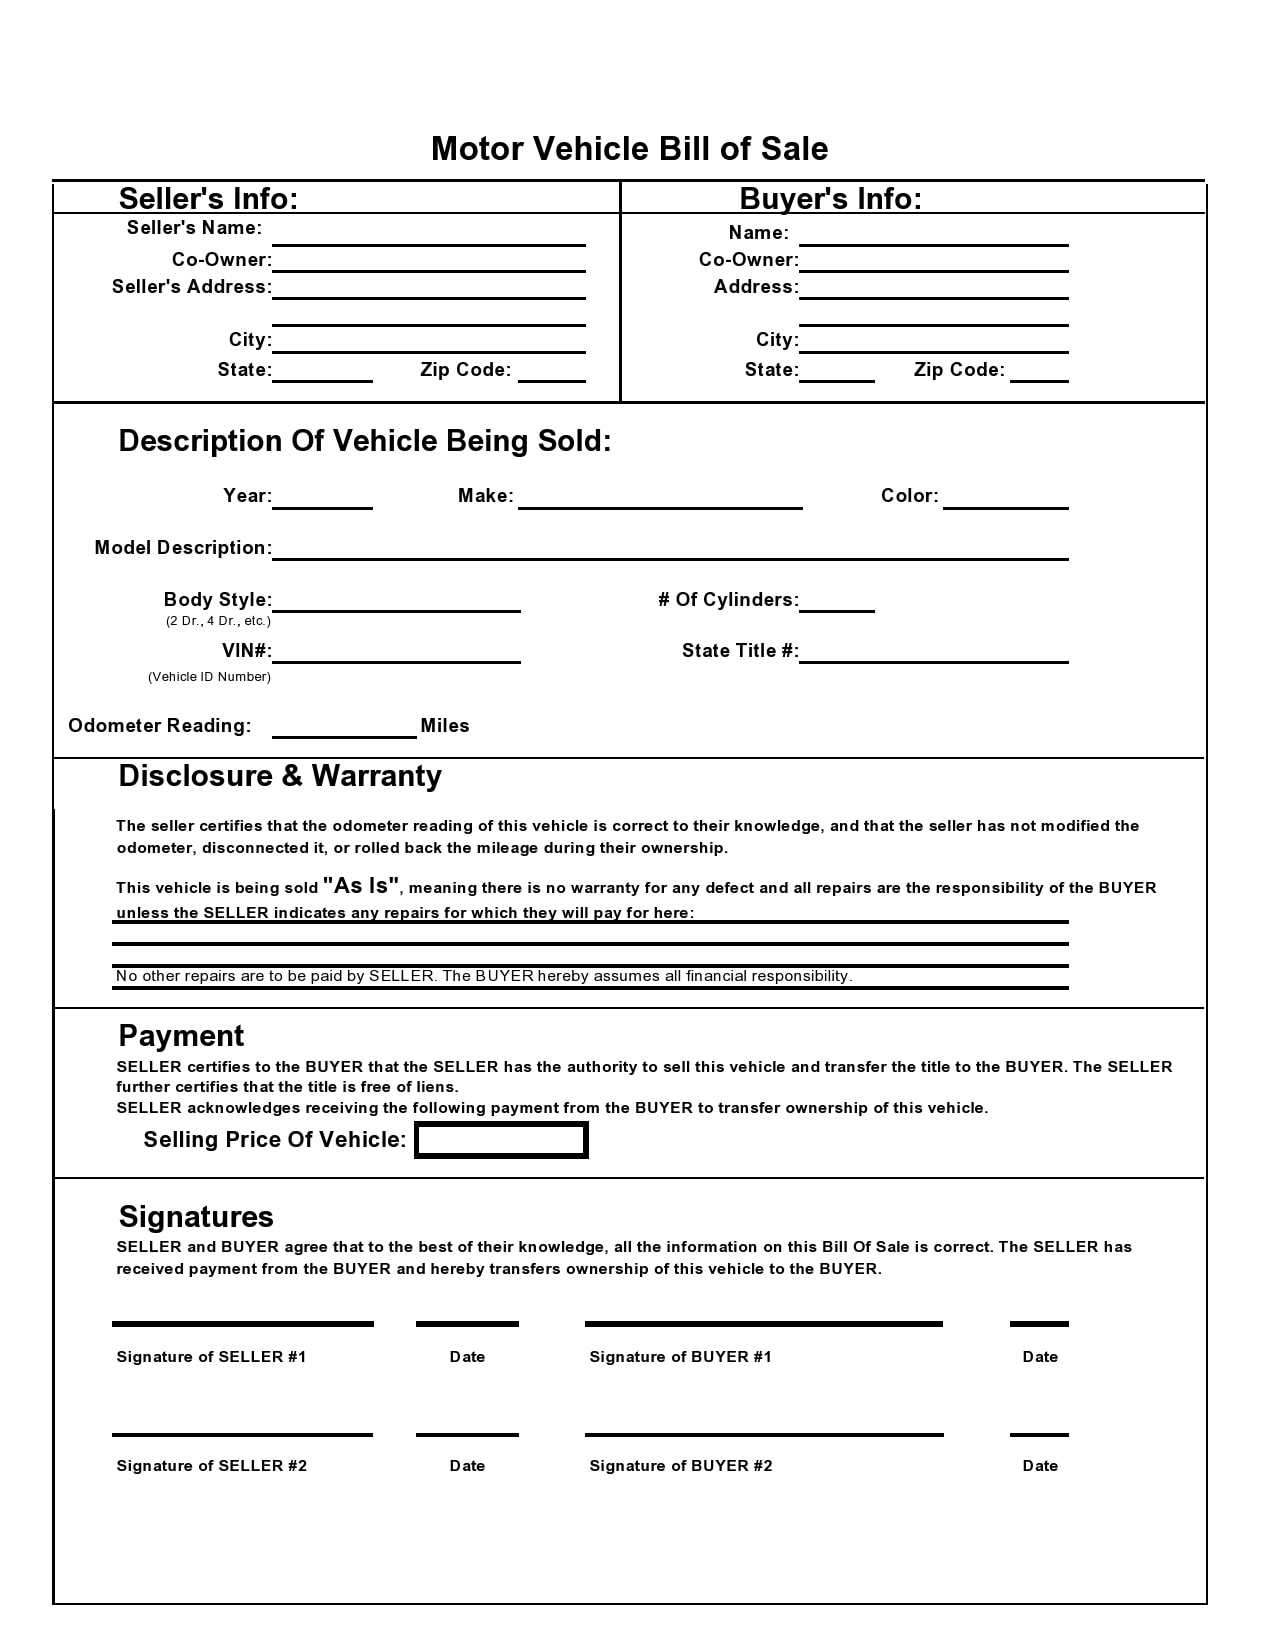 29-printable-motorcycle-bill-of-sale-forms-free-templatearchive